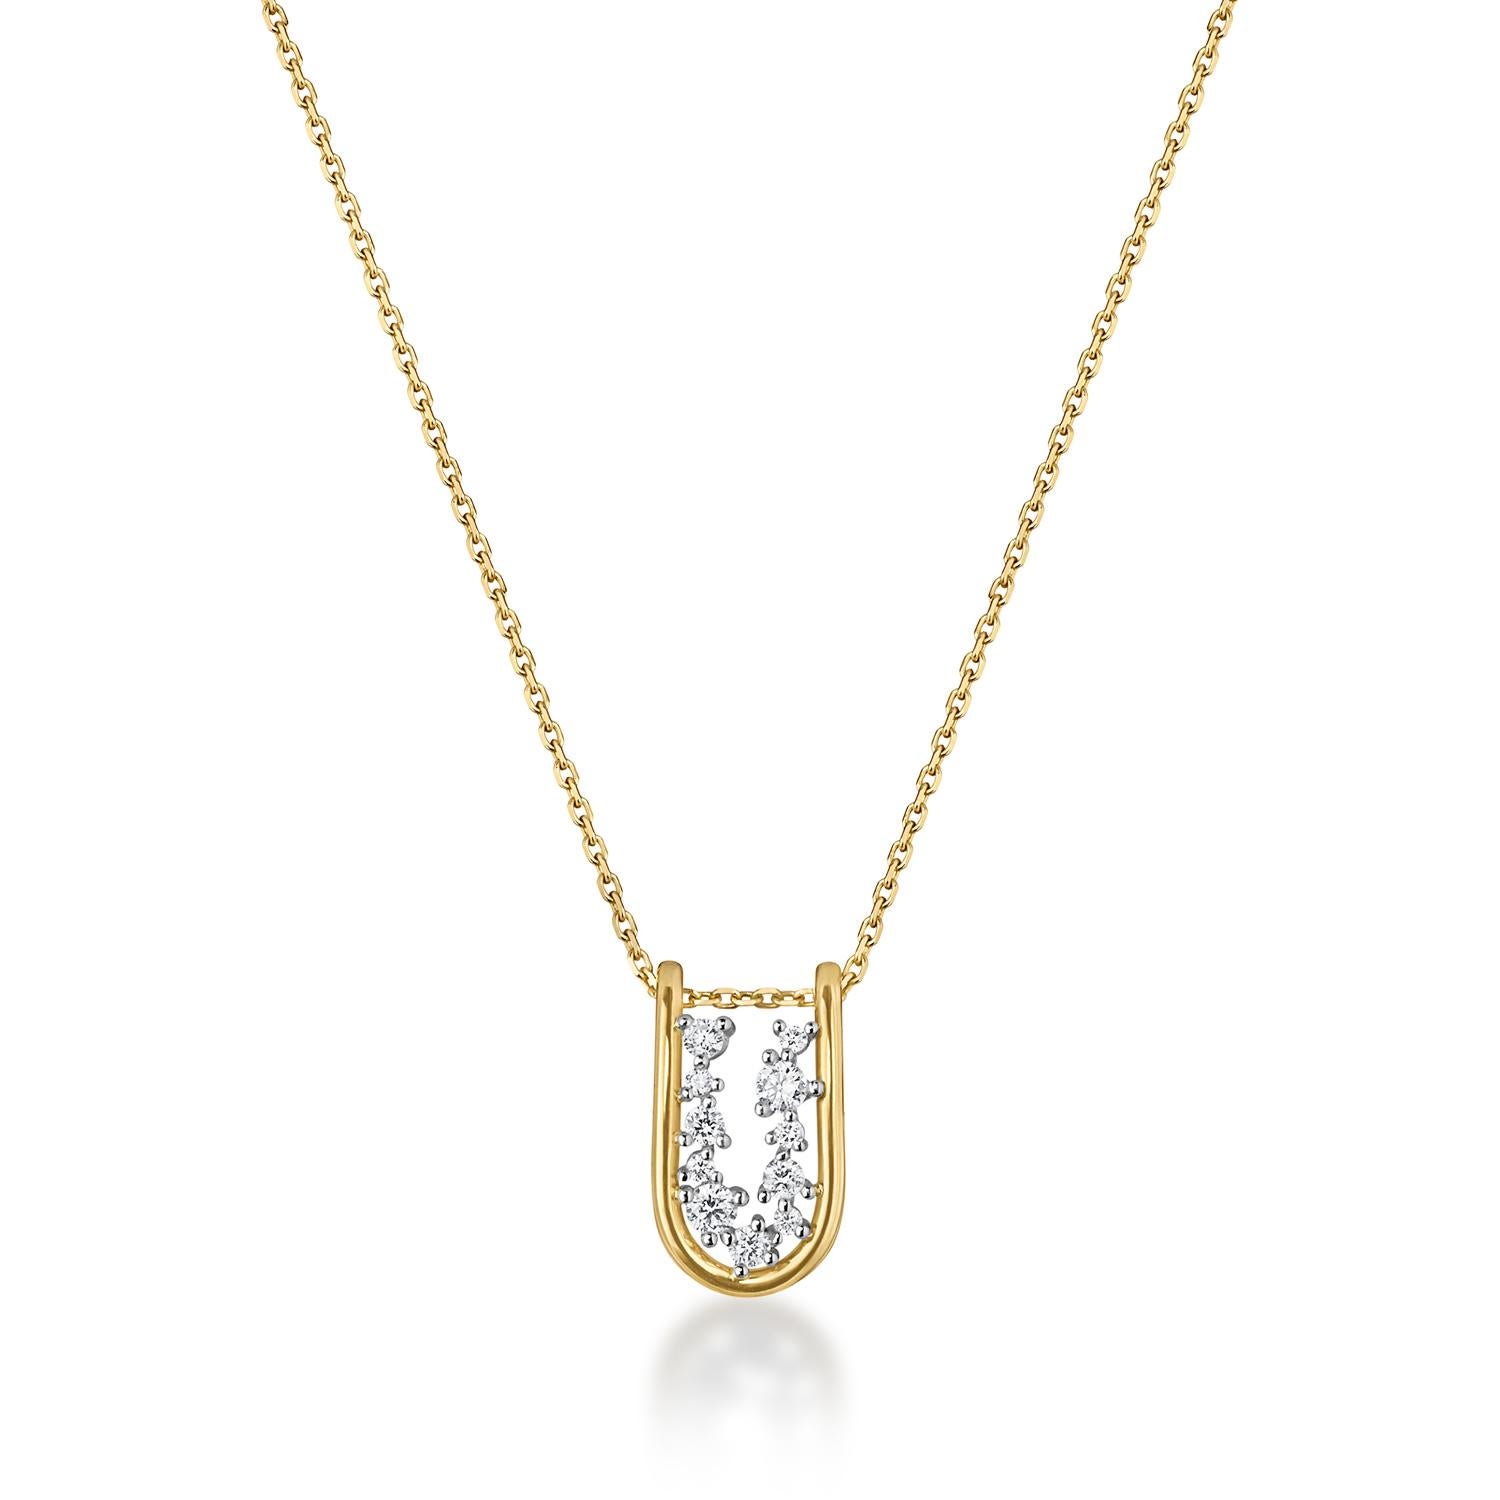 A 17mm small folded link pendant perfect to wear alone or layered. It is meticulously handcrafted with 18K solid gold with varying sized round natural diamonds set in platinum. 

The Mara Collection was built around the beauty of negative space and